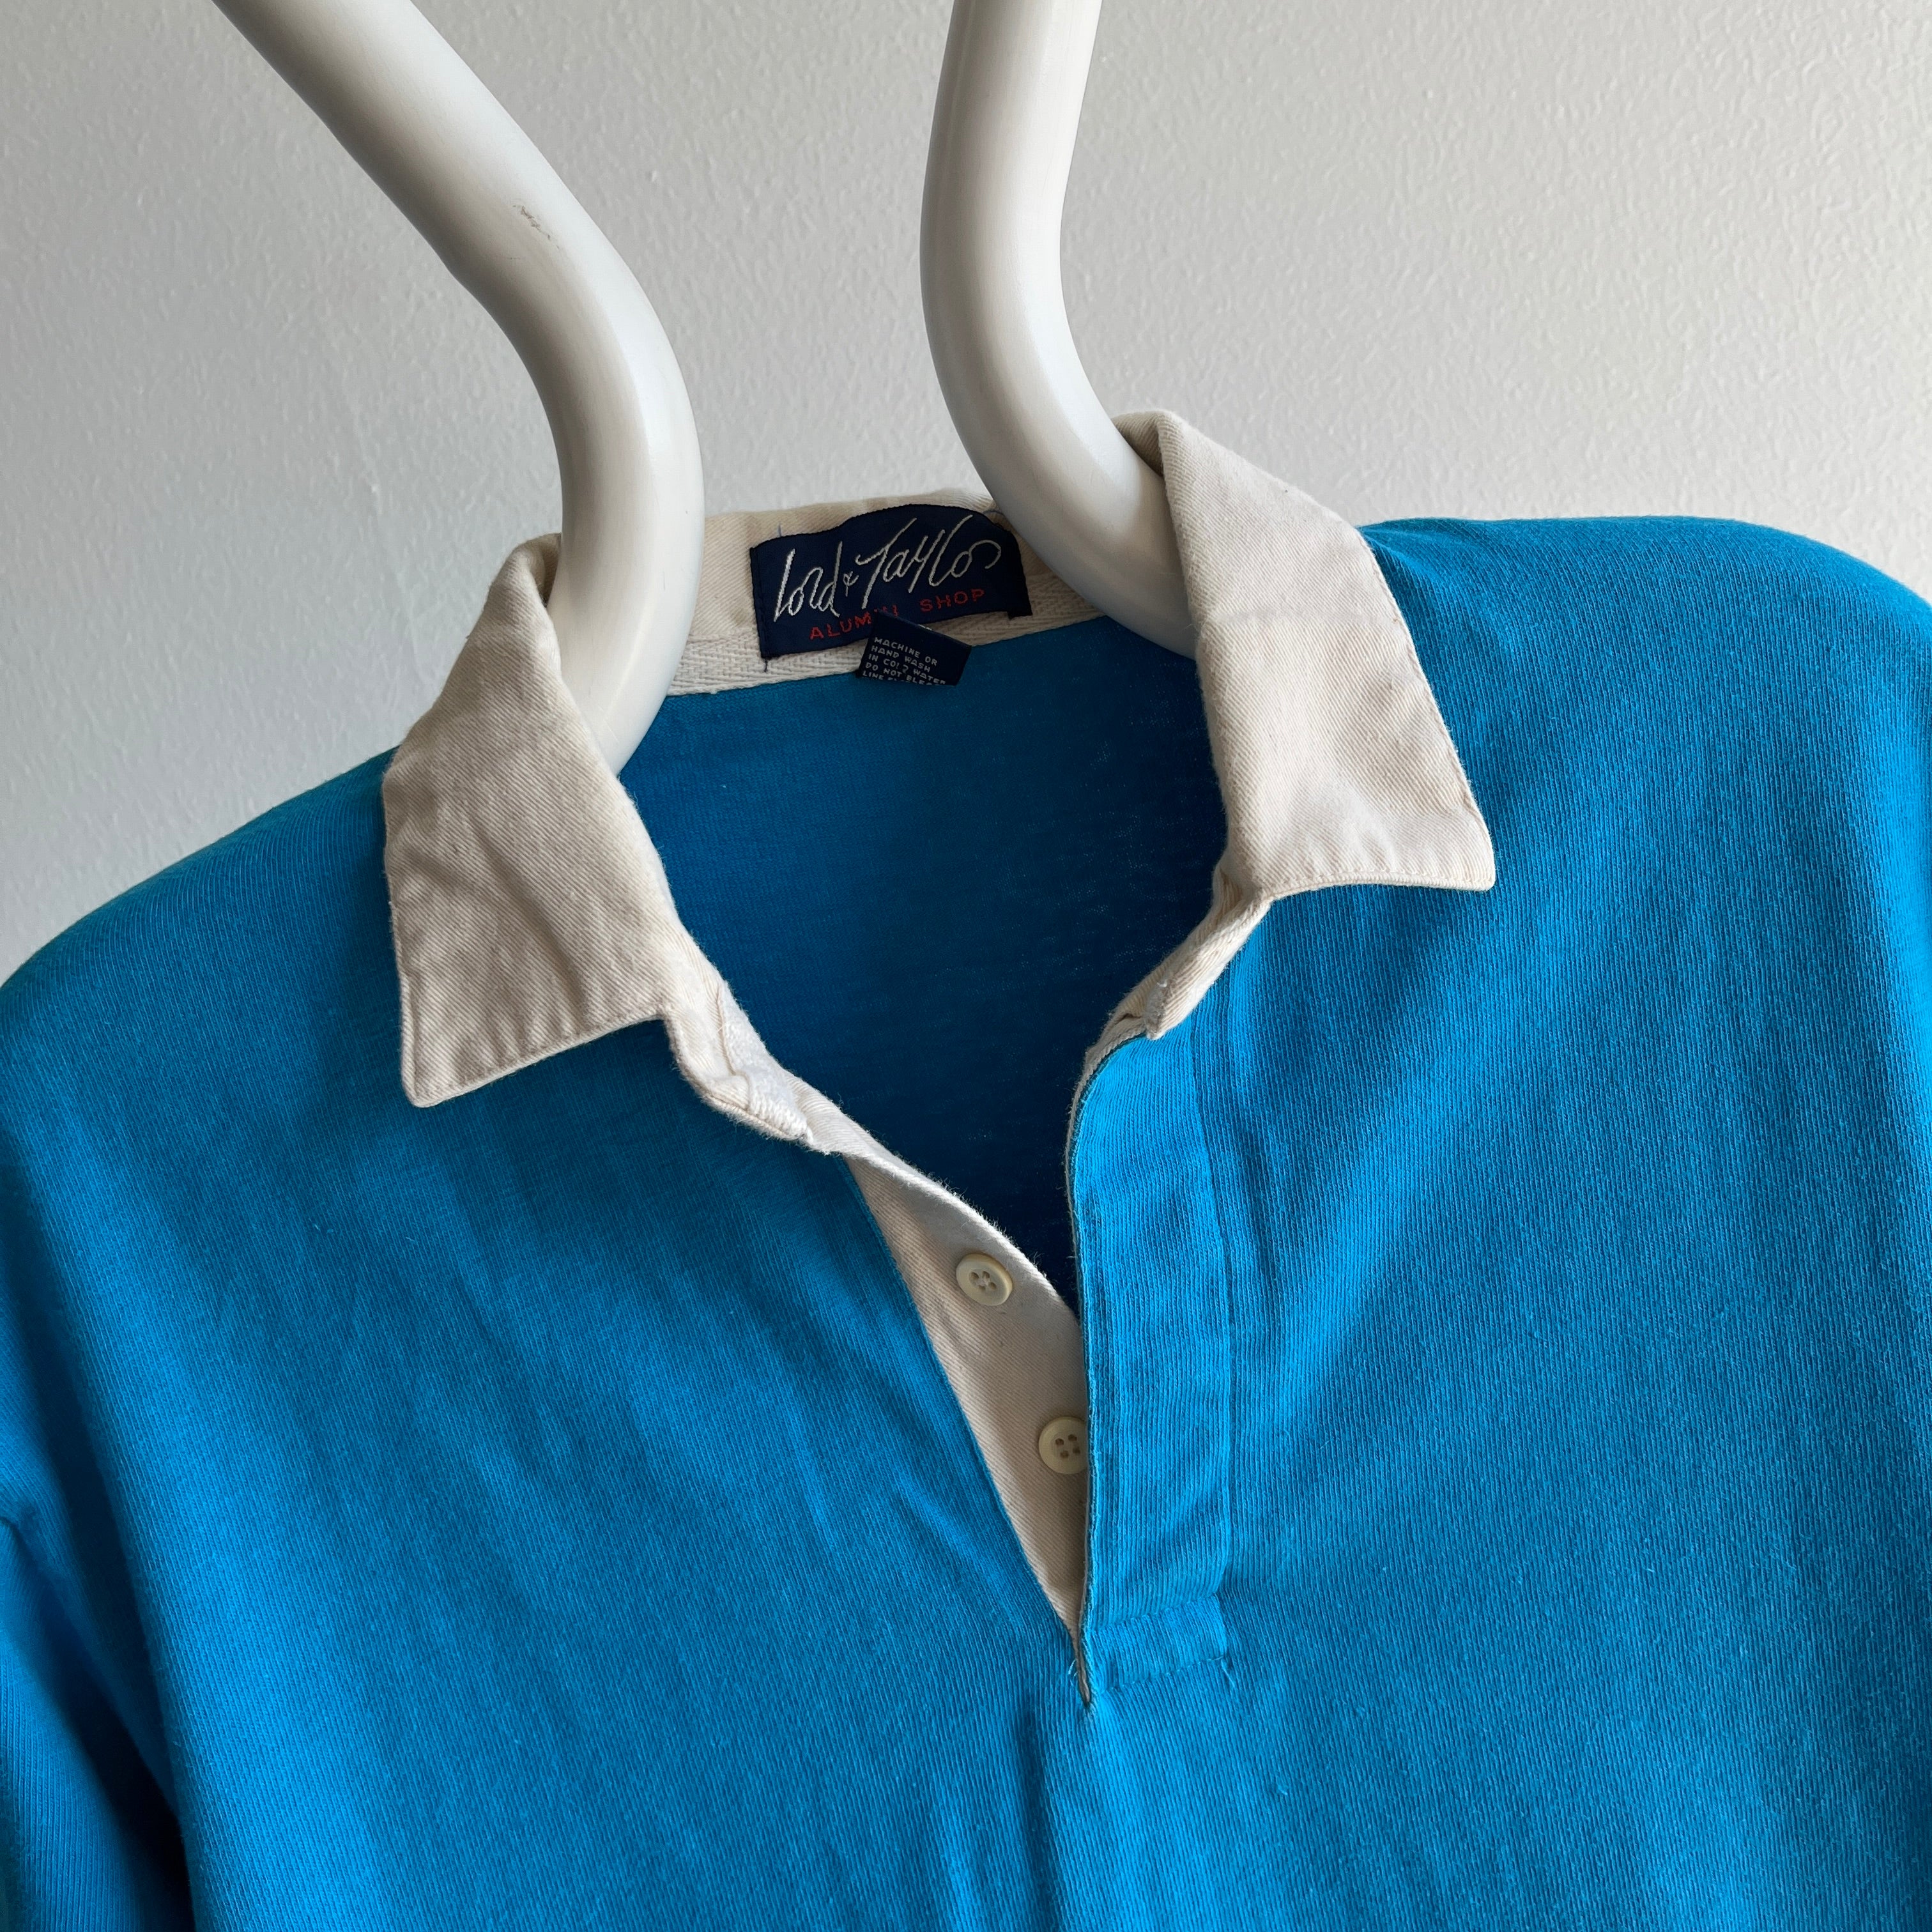 1980s Teal Lord & Taylor Polo Sweatshirt/Rugby Shirt with Pouch - !!!!